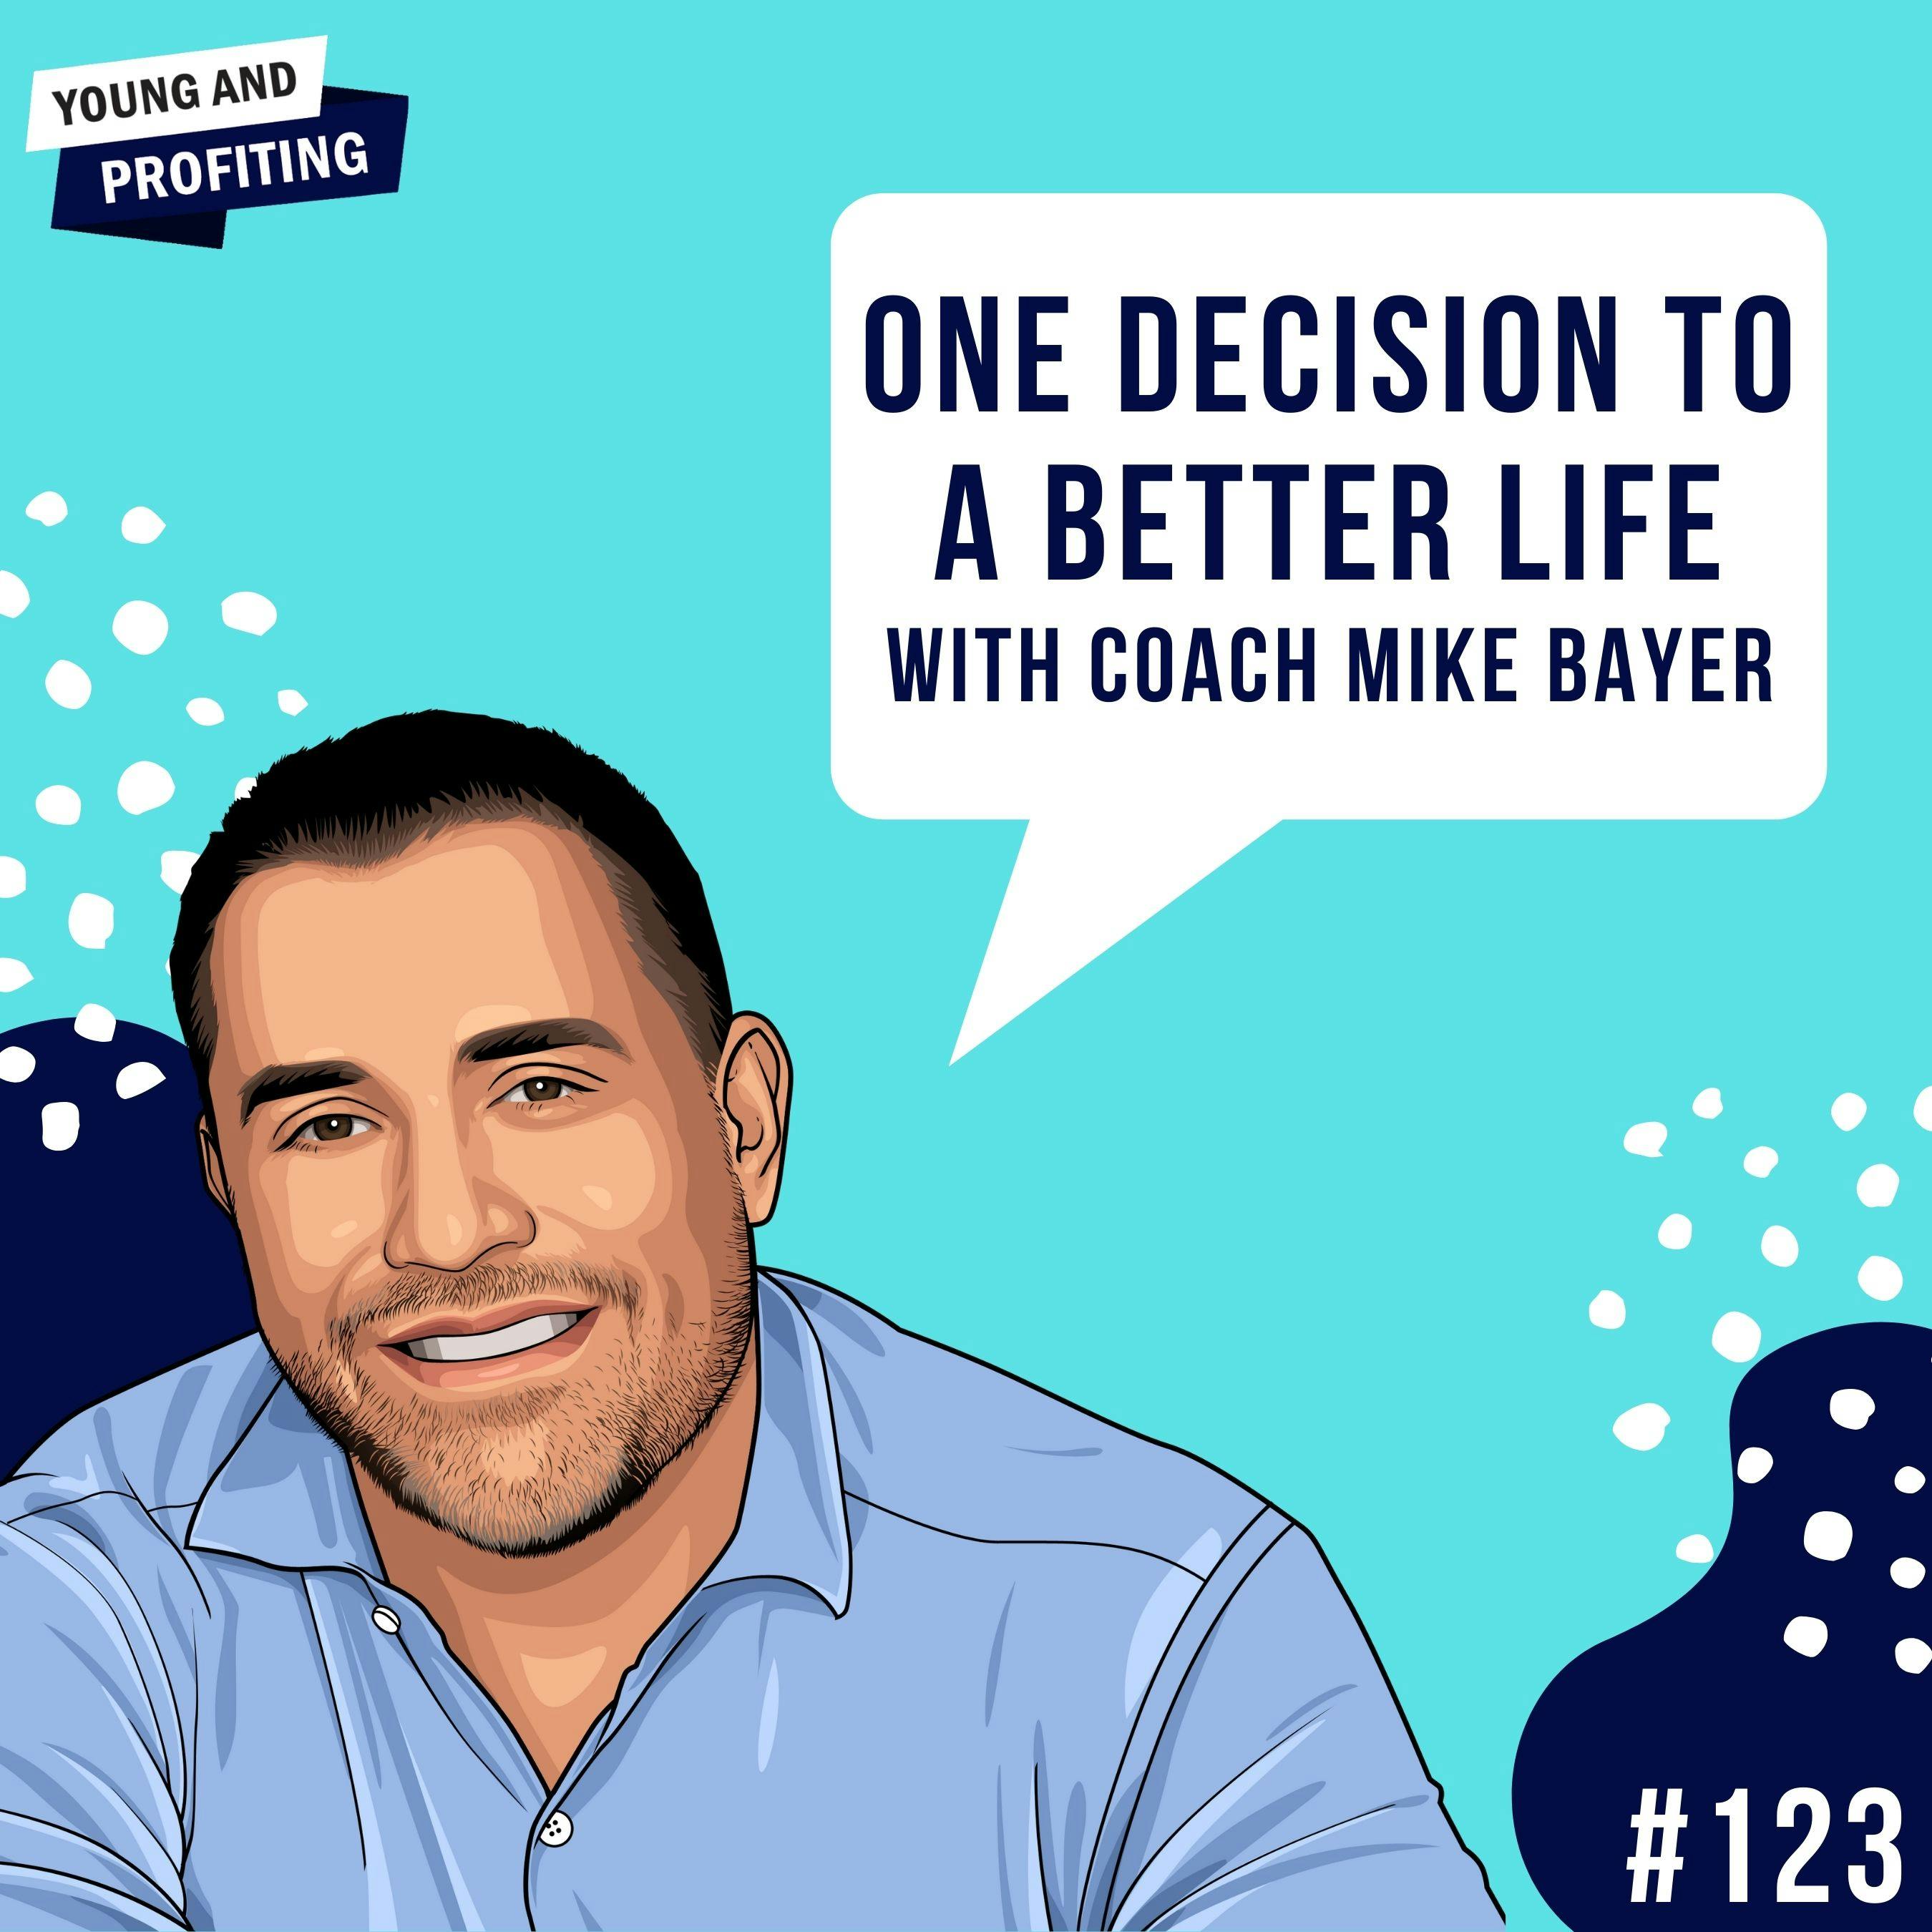 Coach Mike Bayer: One Decision To a Better Life | E123 by Hala Taha | YAP Media Network